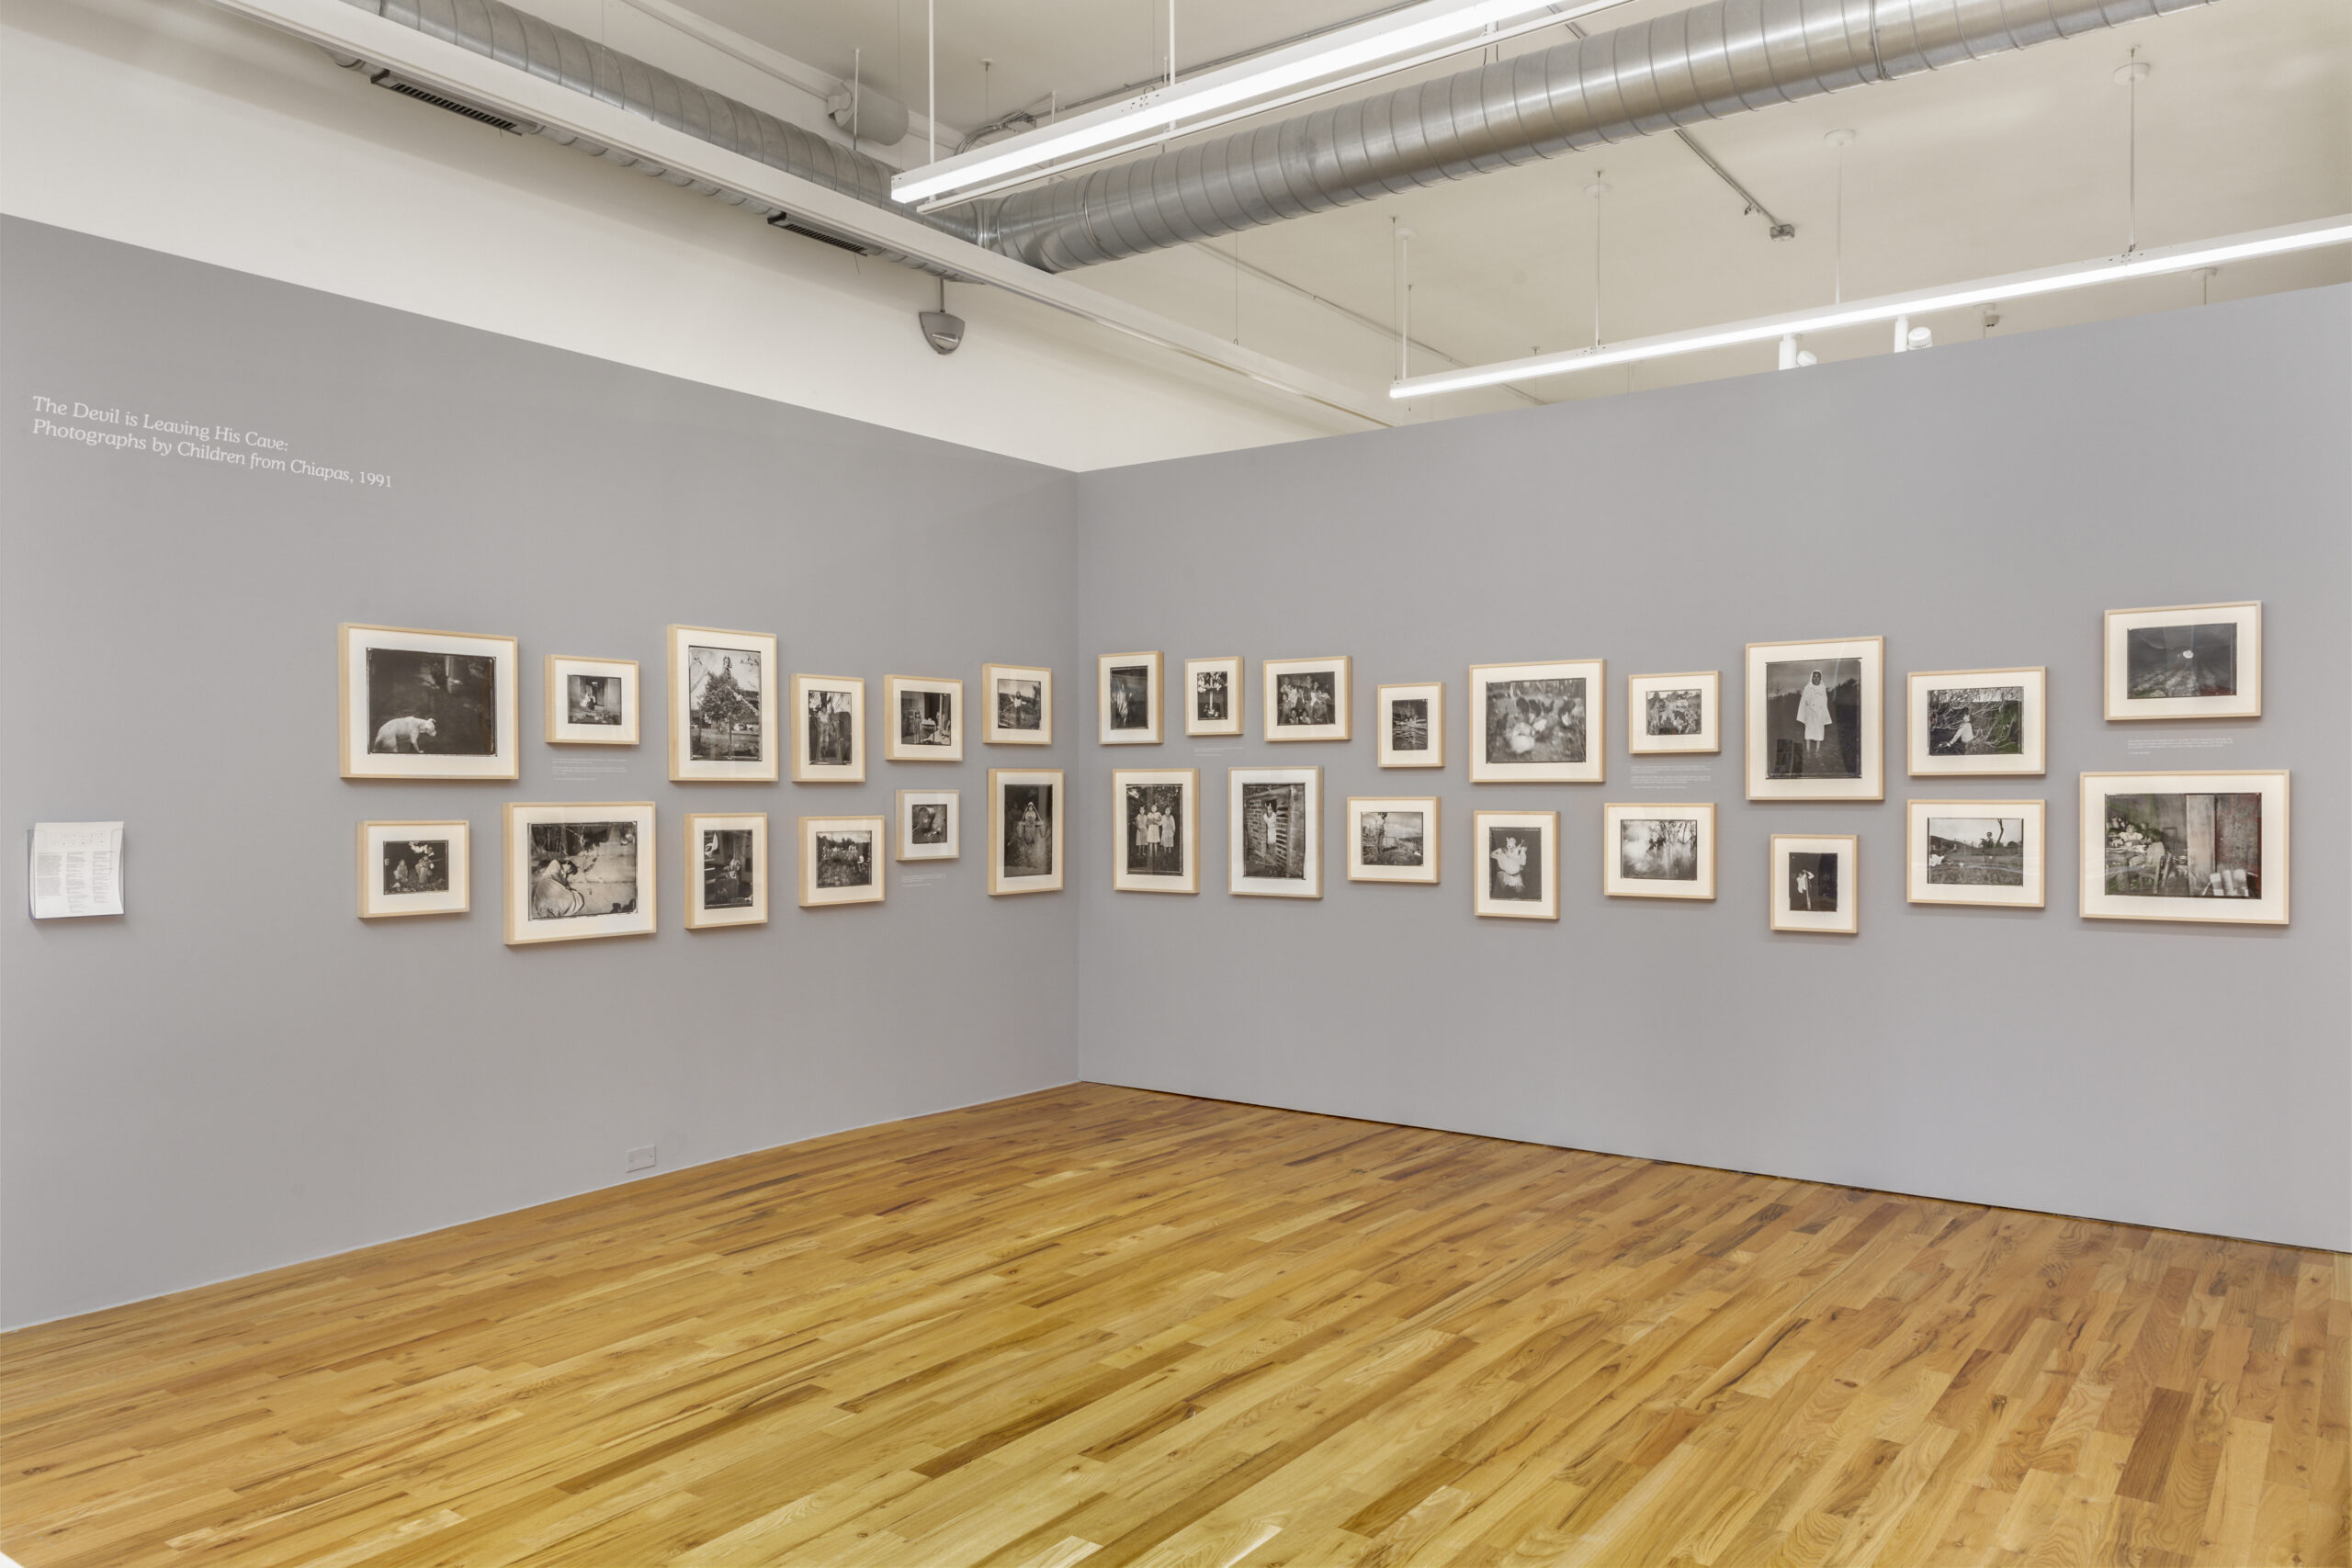 A series of black and white photographs set against a grey wall.